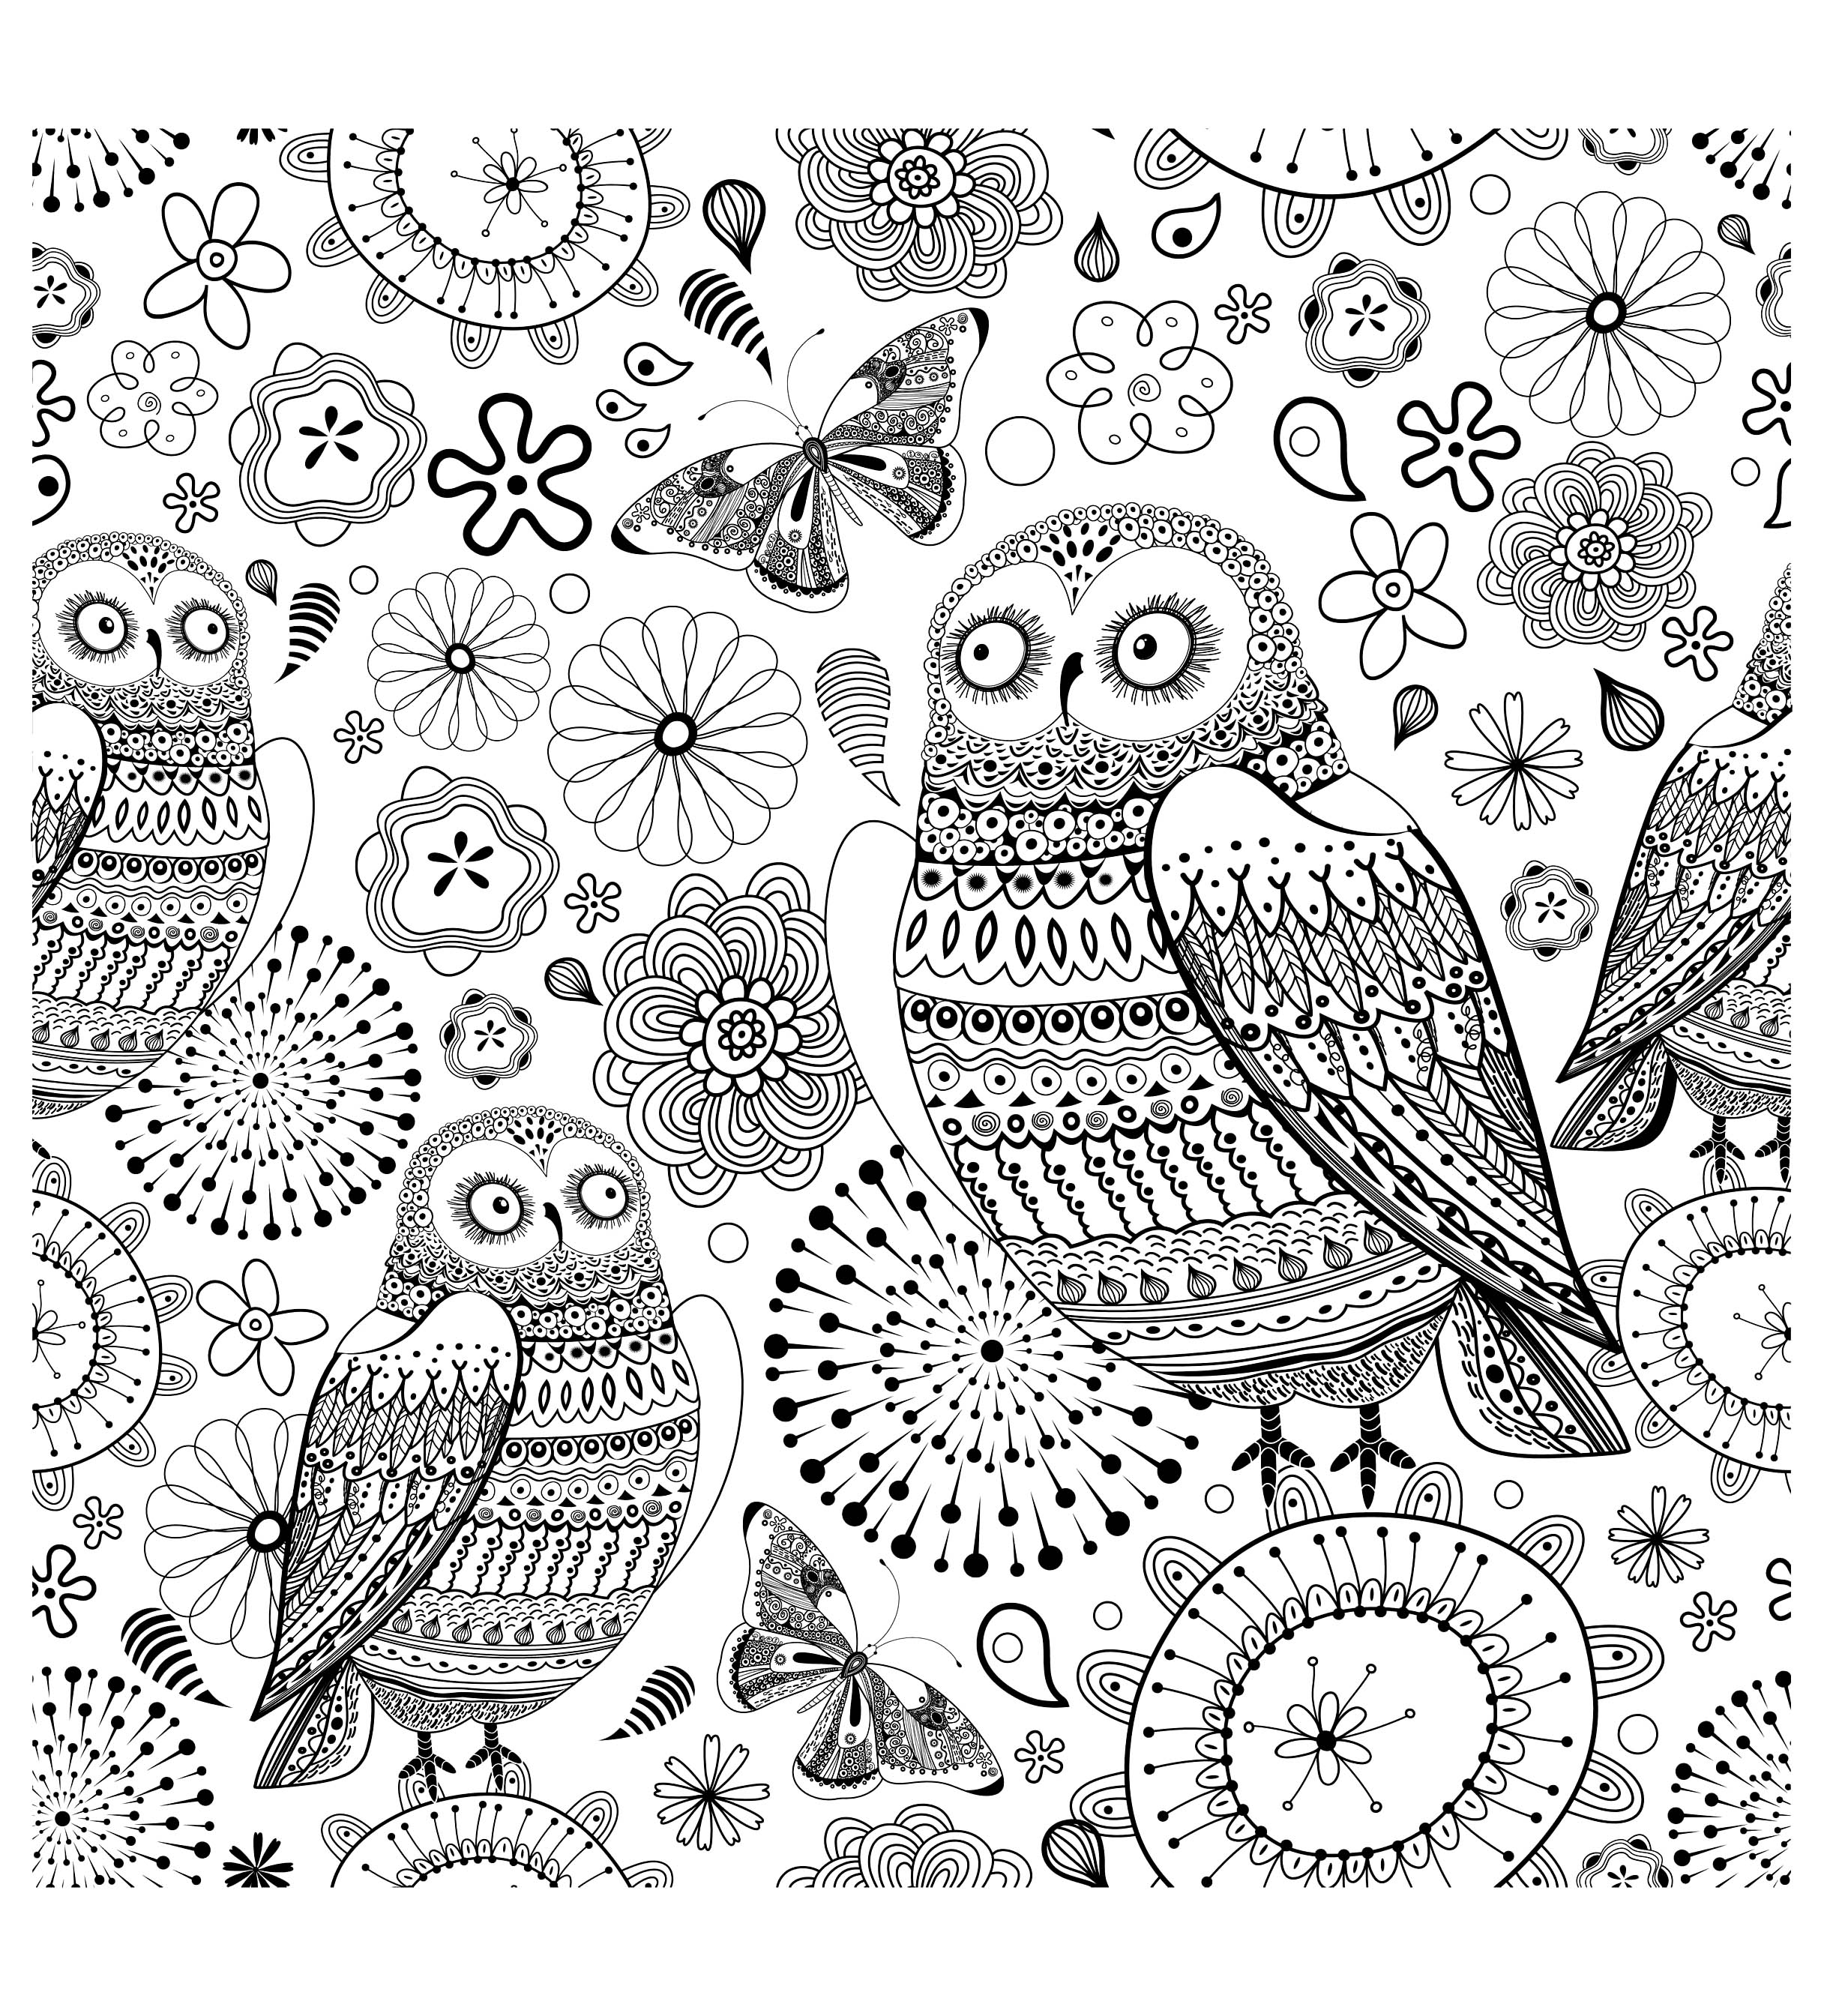 Difficult owls | Animals - Coloring pages for adults ...